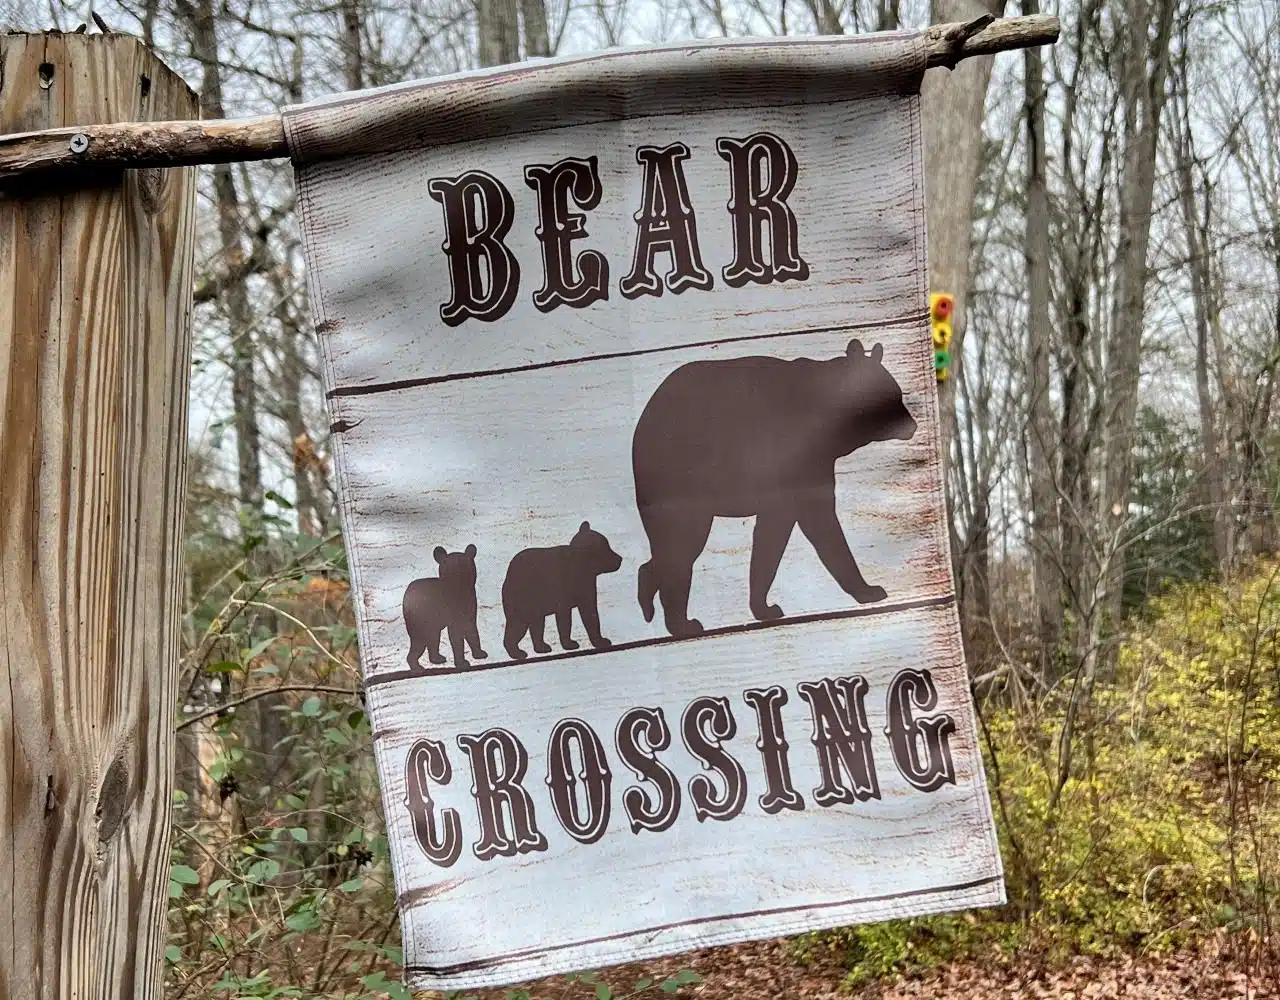 Check out the bear crossing walking trail